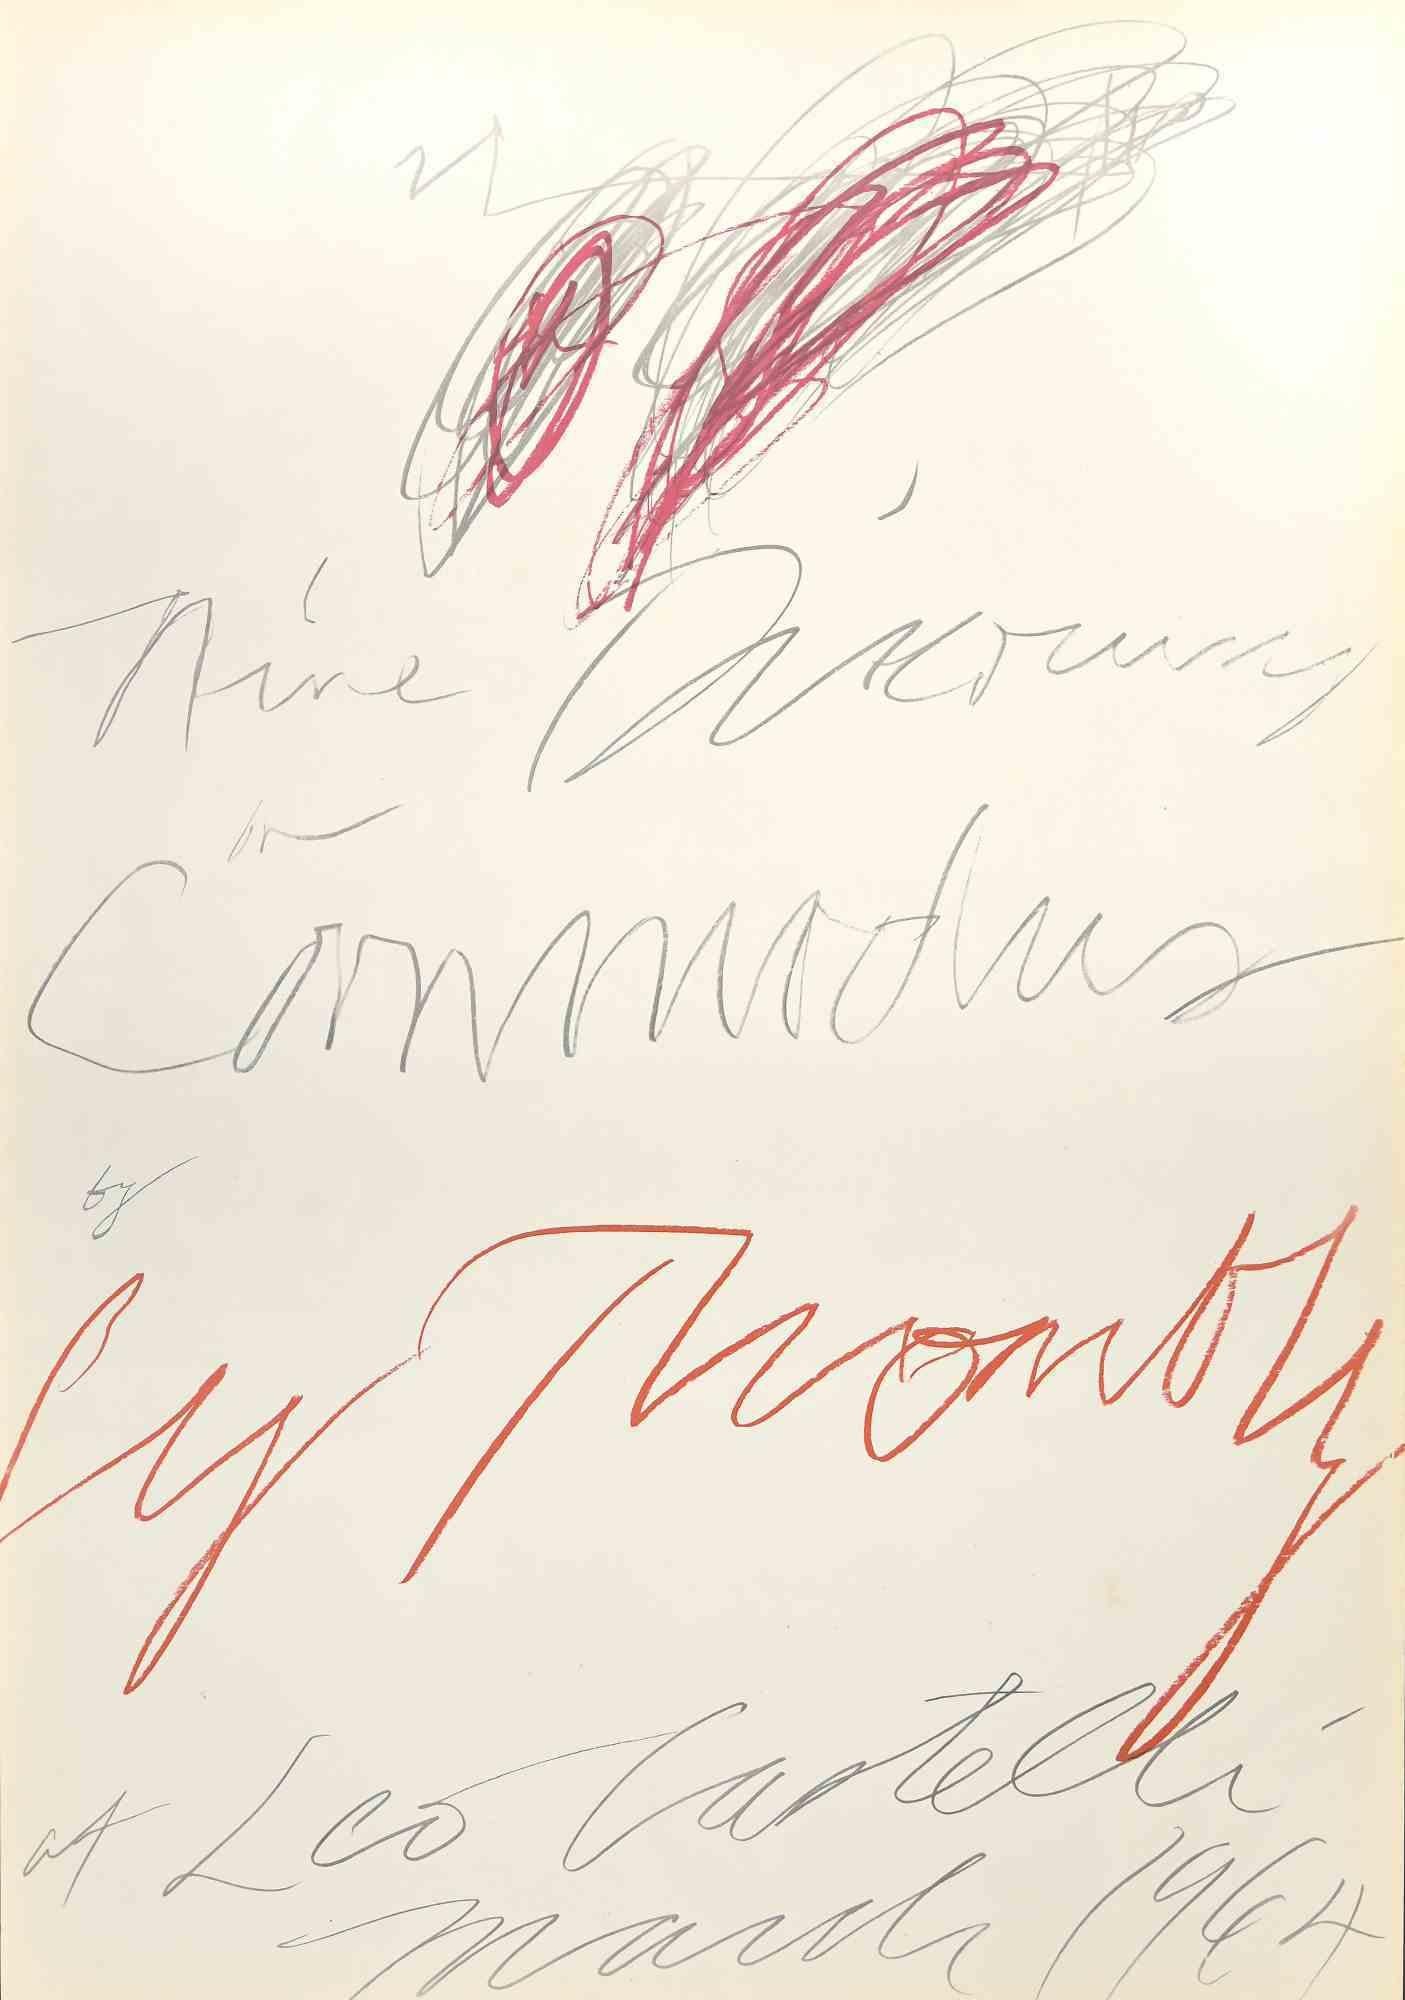 Twombly Exhibition - Leo Castelli Gallery is a colored lithograph realized in 1964.

This artwork was realized in occasion of the exhibition of  Cy Twombly held at Leo Castelly Gallery in New York in 1964.

The lithograph represents one of the